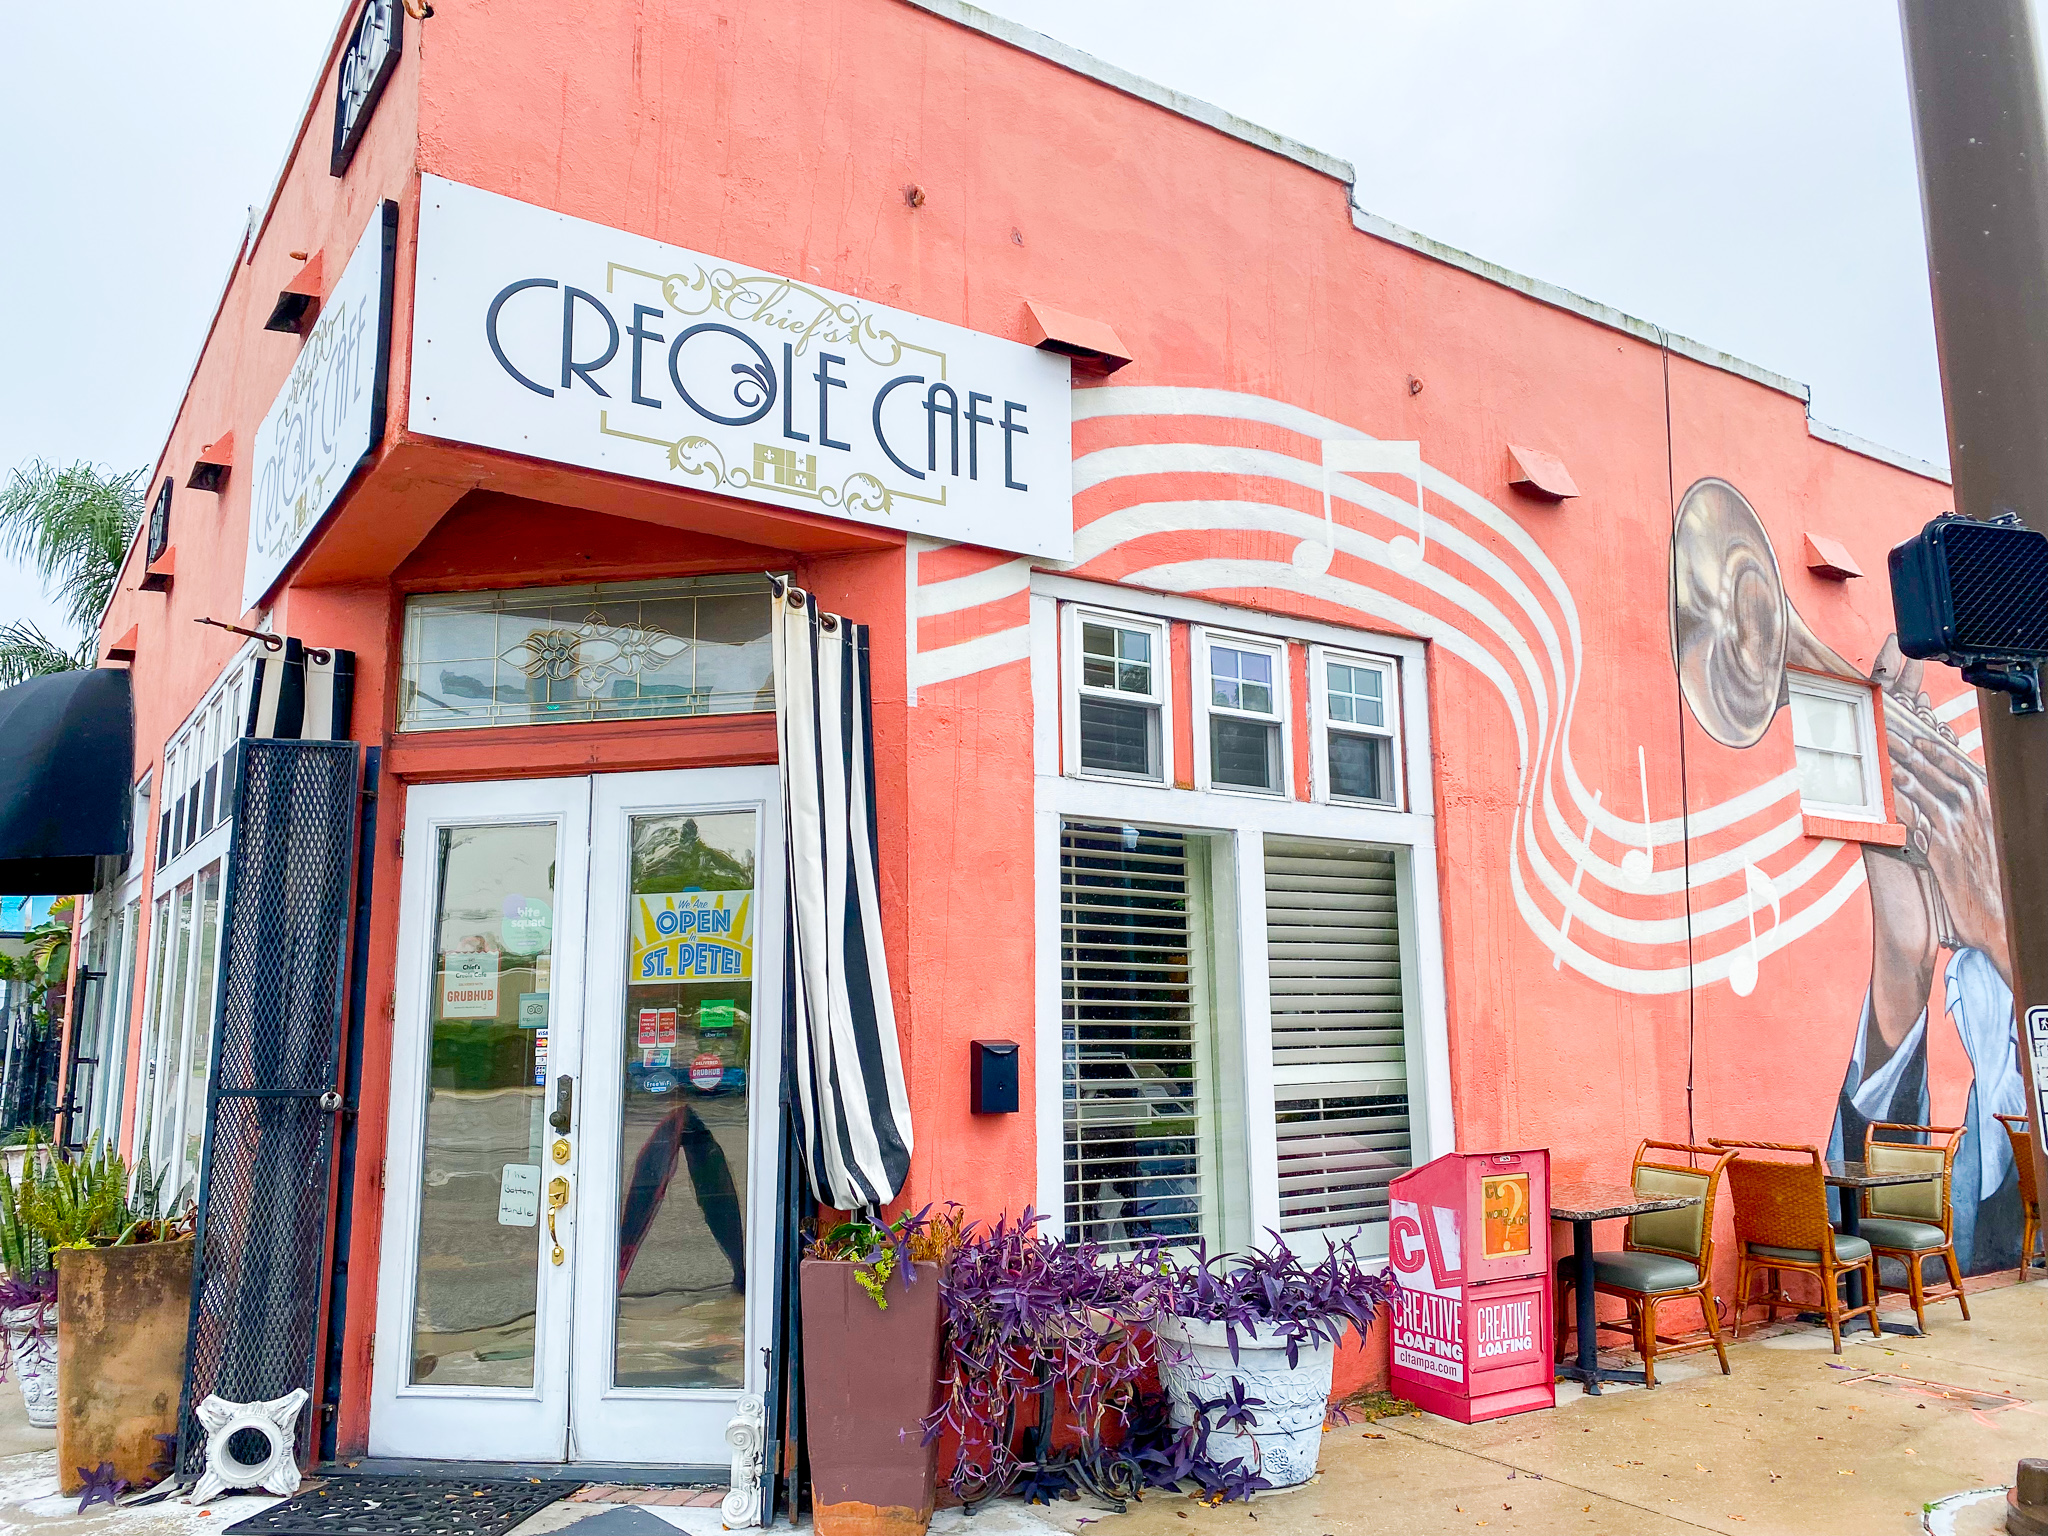 Chief's Creole Cafe Exterior